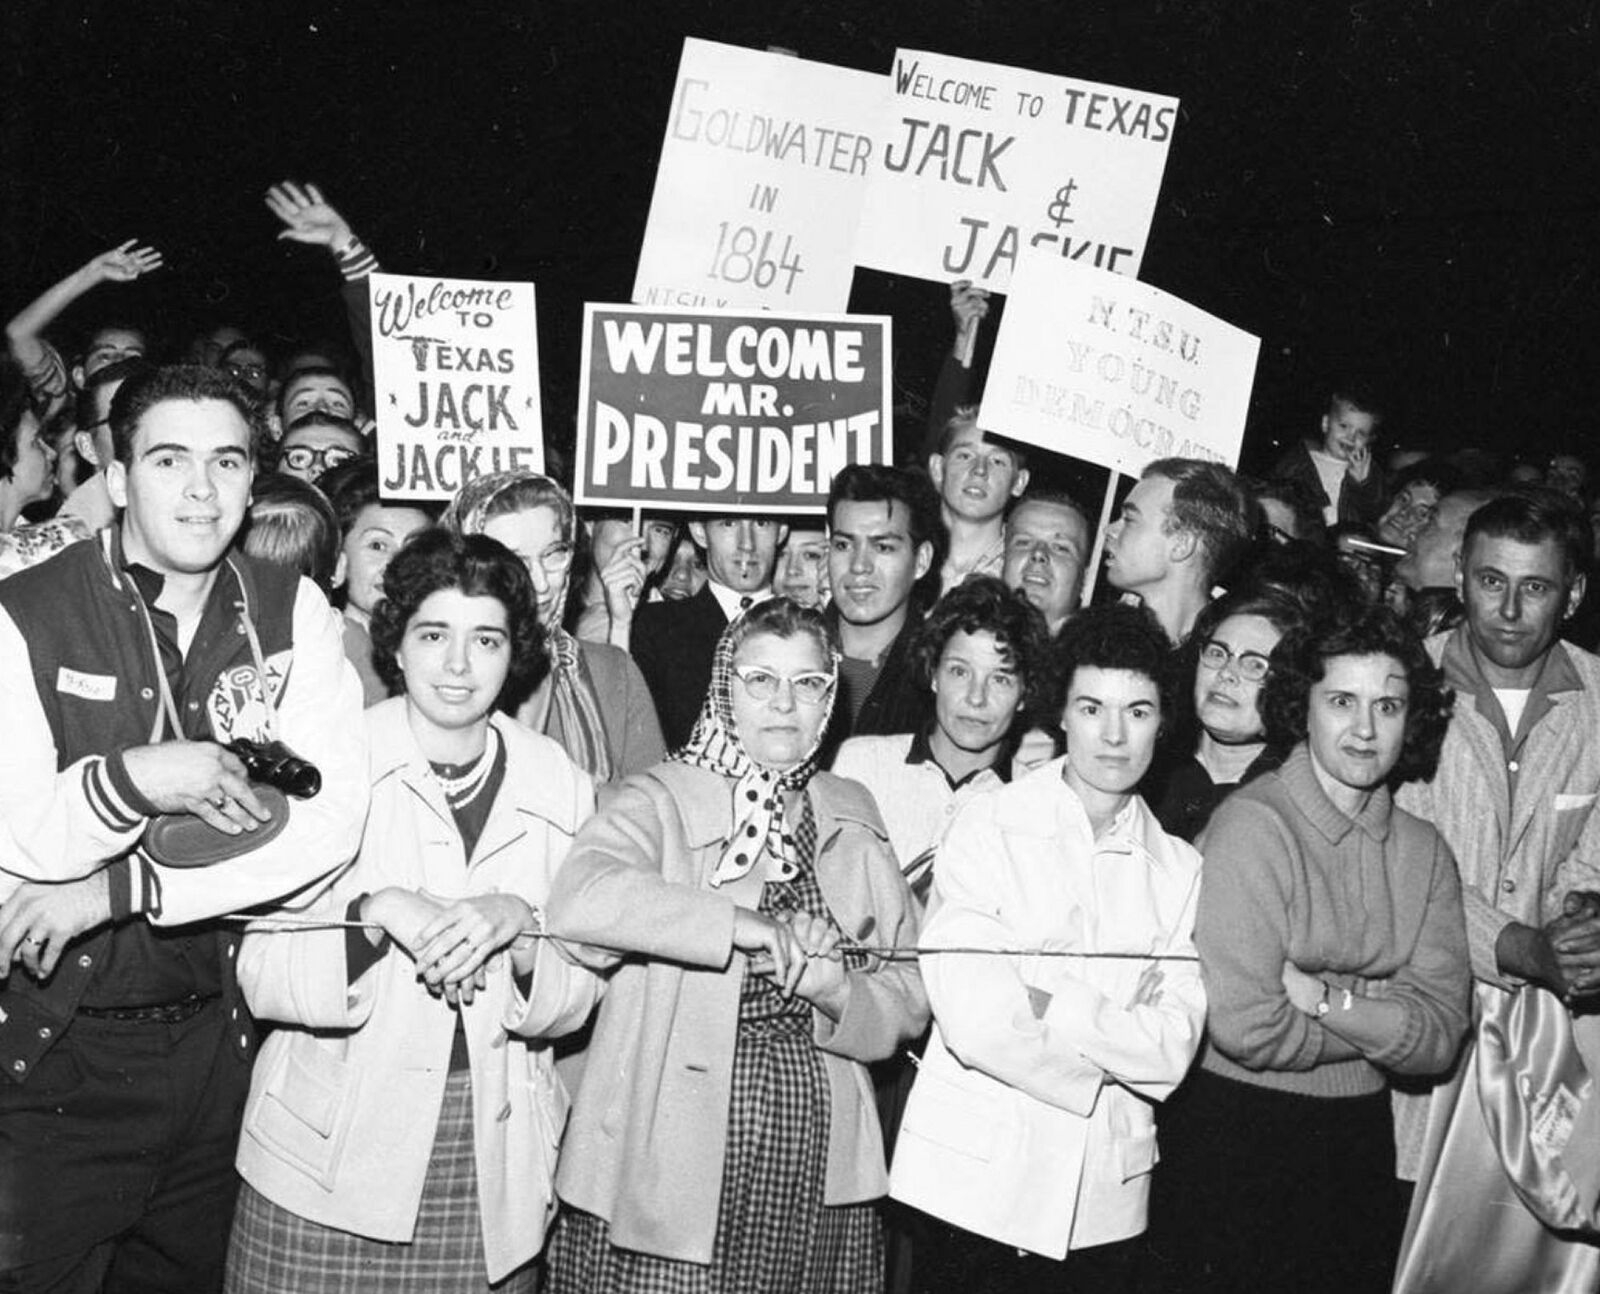 1963 CROWD WELCOMING PRESIDENT KENNEDY to TEXAS  11-22-63 Photo  (225-D)